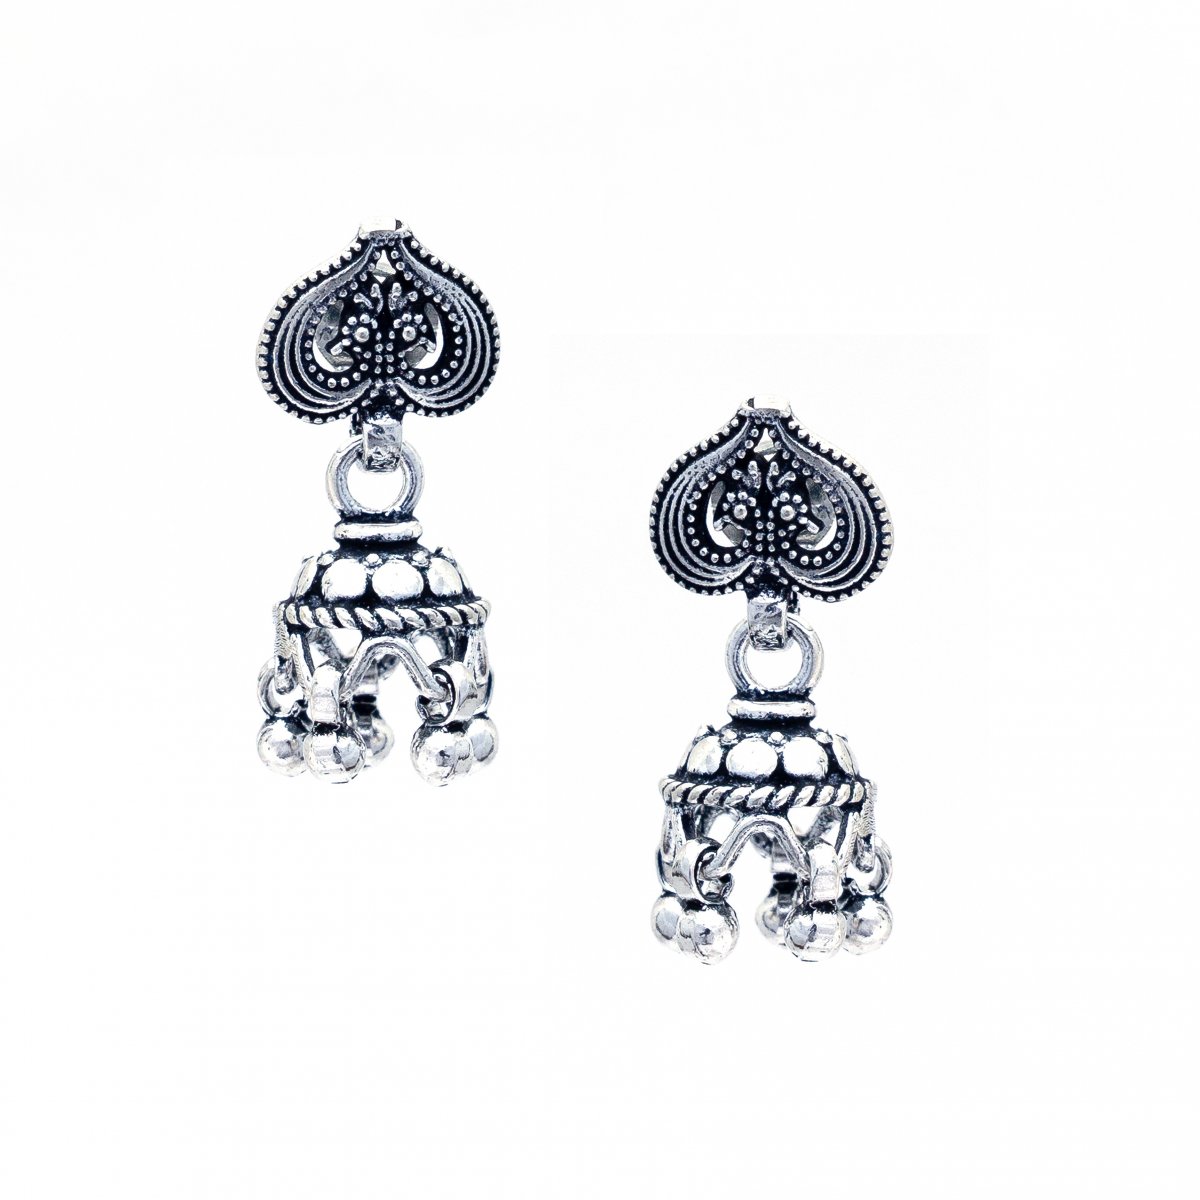 LIGHTWEIGHT SILVER OXIDIZED TRADITIONAL JHUMKA JHUMKI EARRINGS FOR WOMEN AND GIRLS